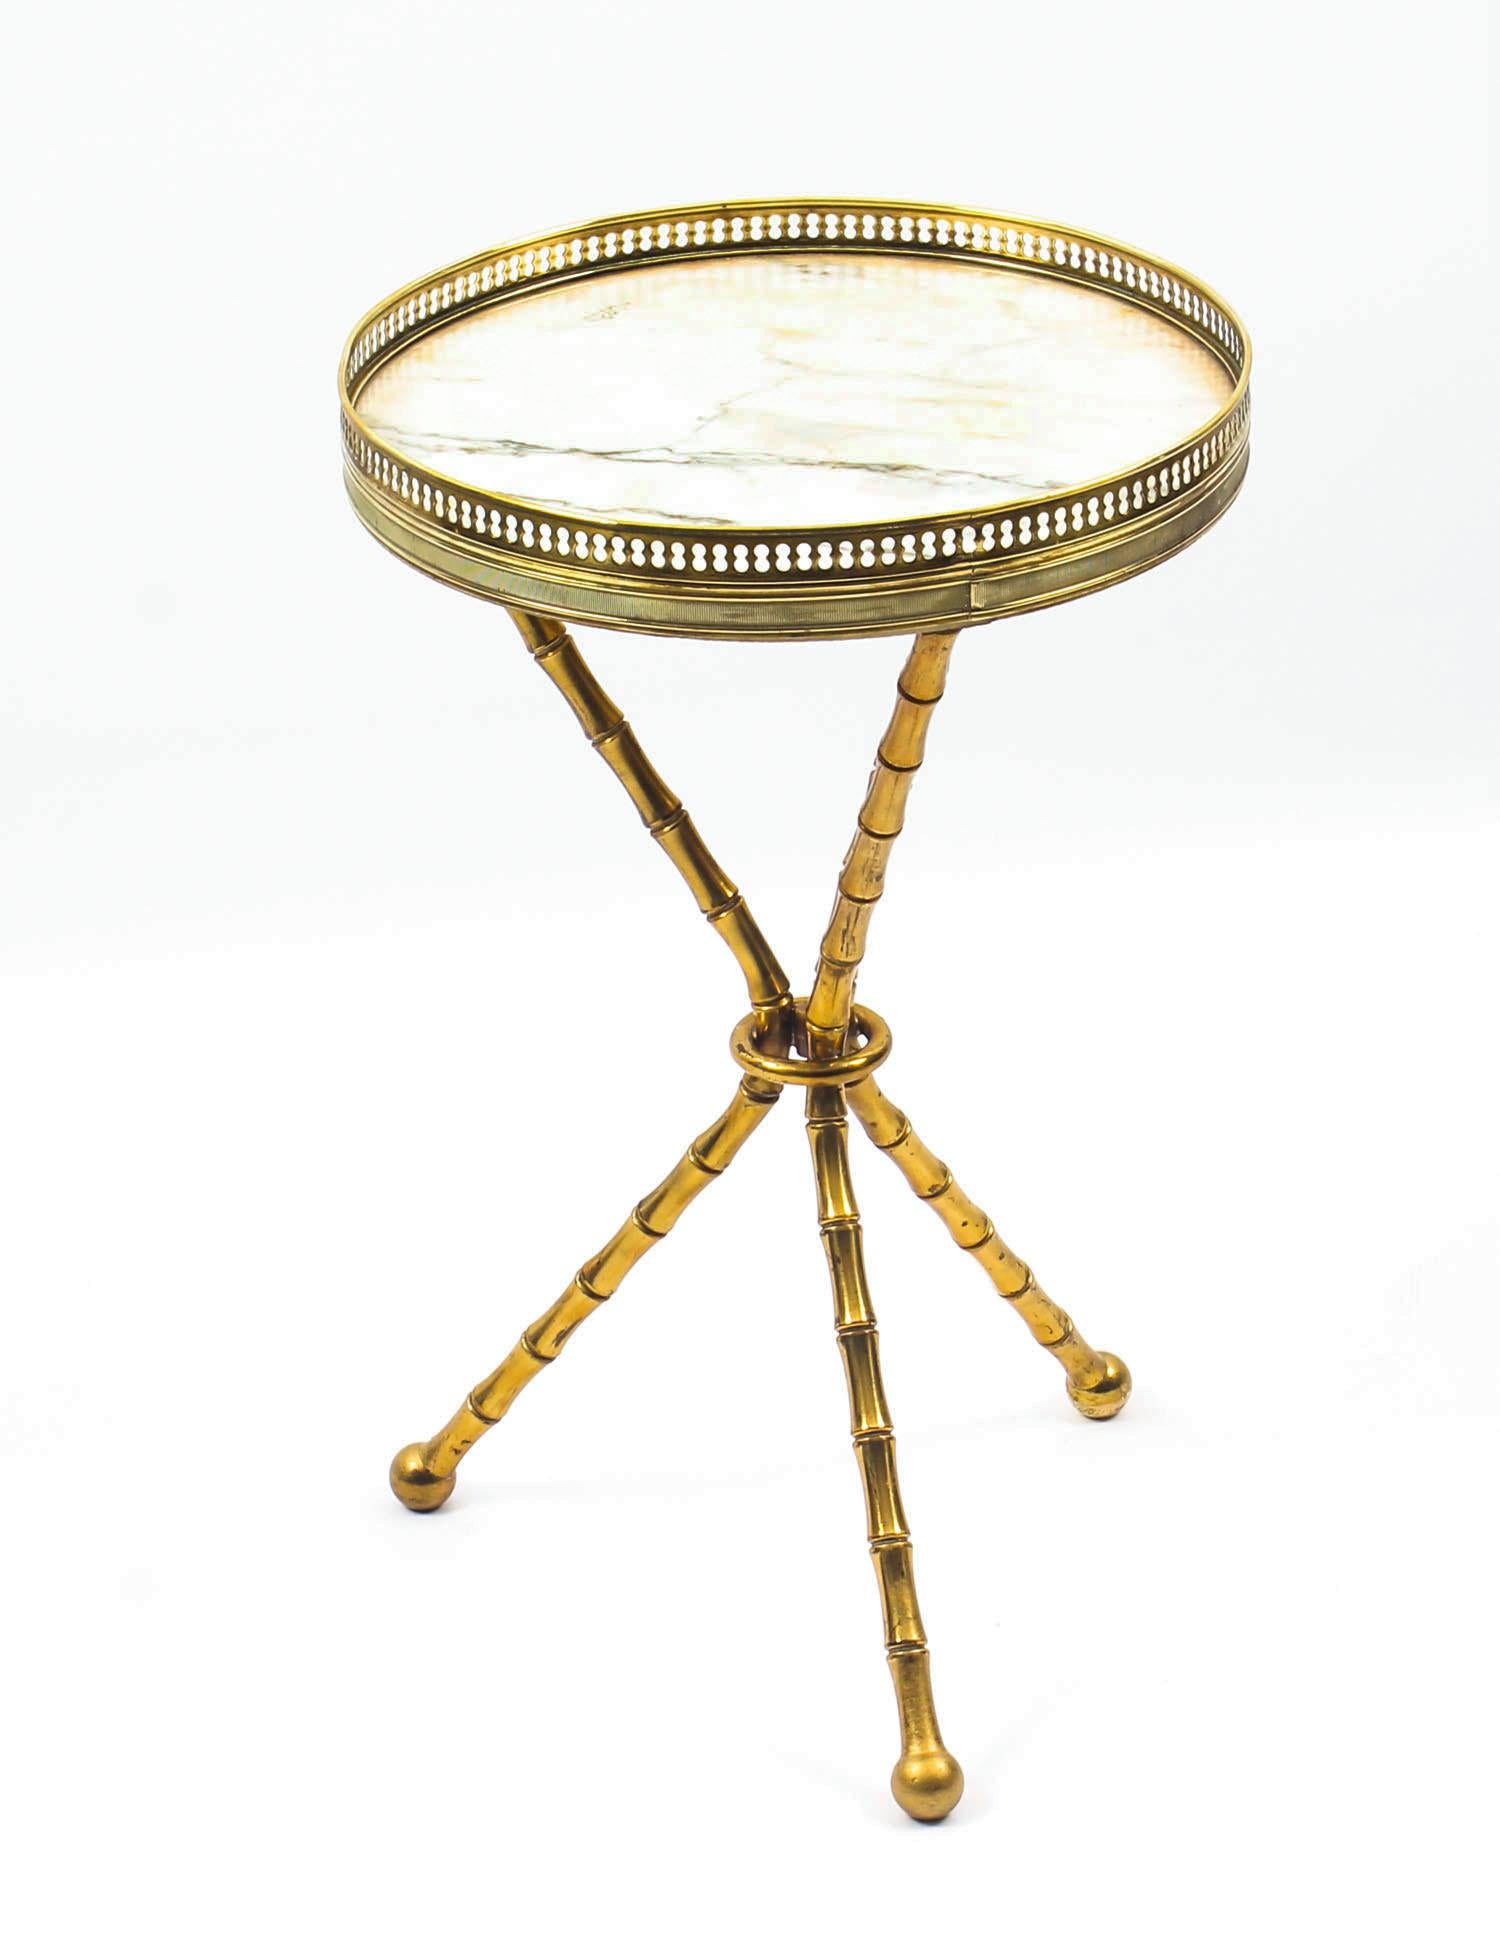 This is a beautiful antique French ormolu occasional table, with an inset circular white variegated Carrara marble-top, circa 1880 in date.

It has been masterfully crafted from ormolu, the marble top with a pierced brass gallery supported by a